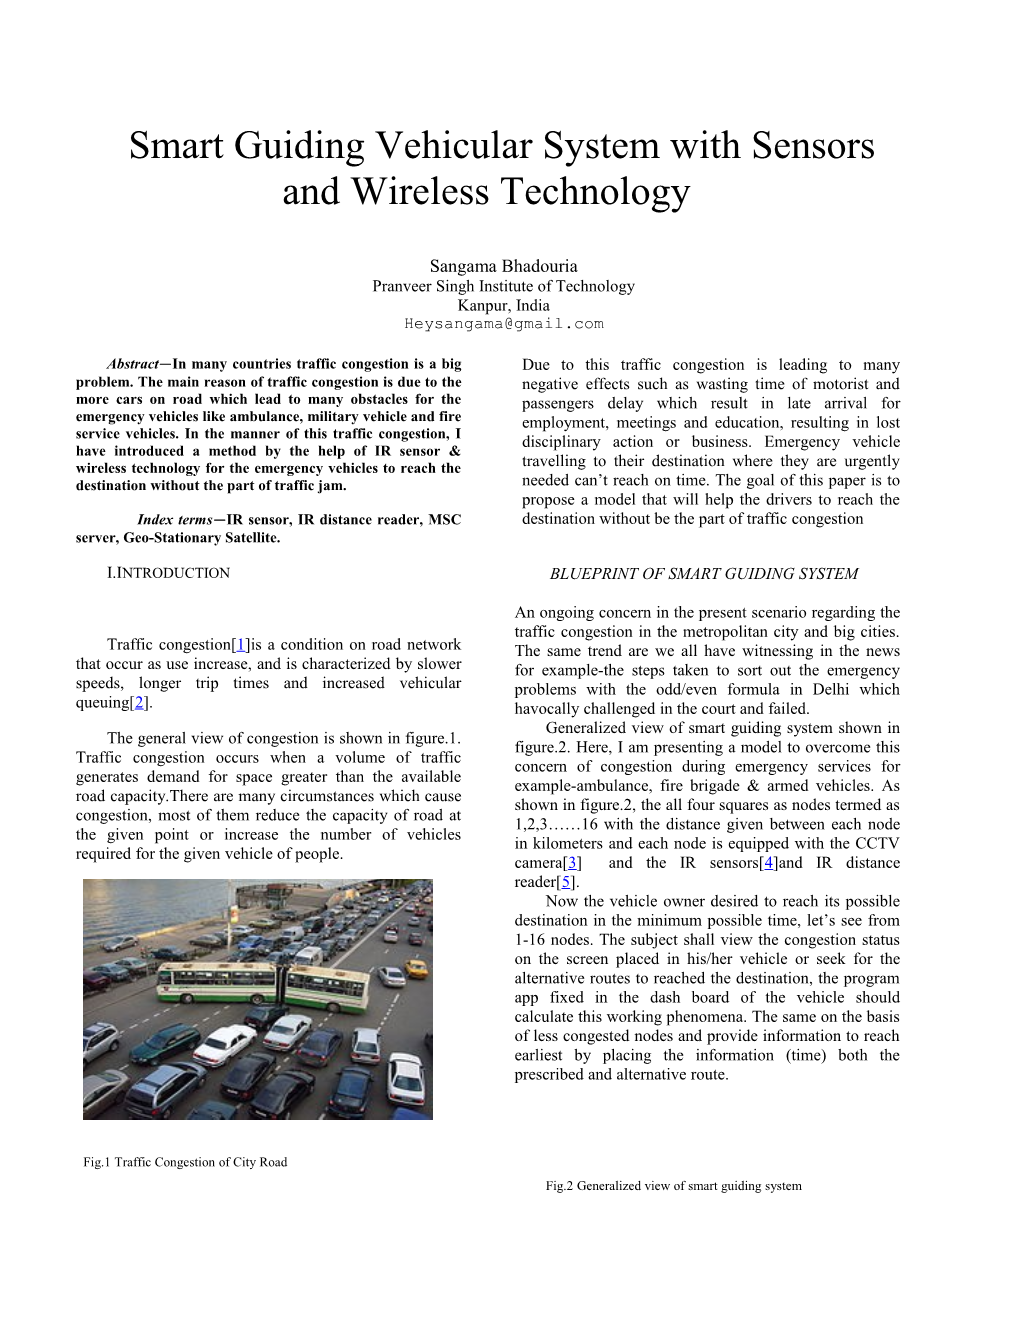 Smart Guiding Vehicular System with Sensors and Wireless Technology